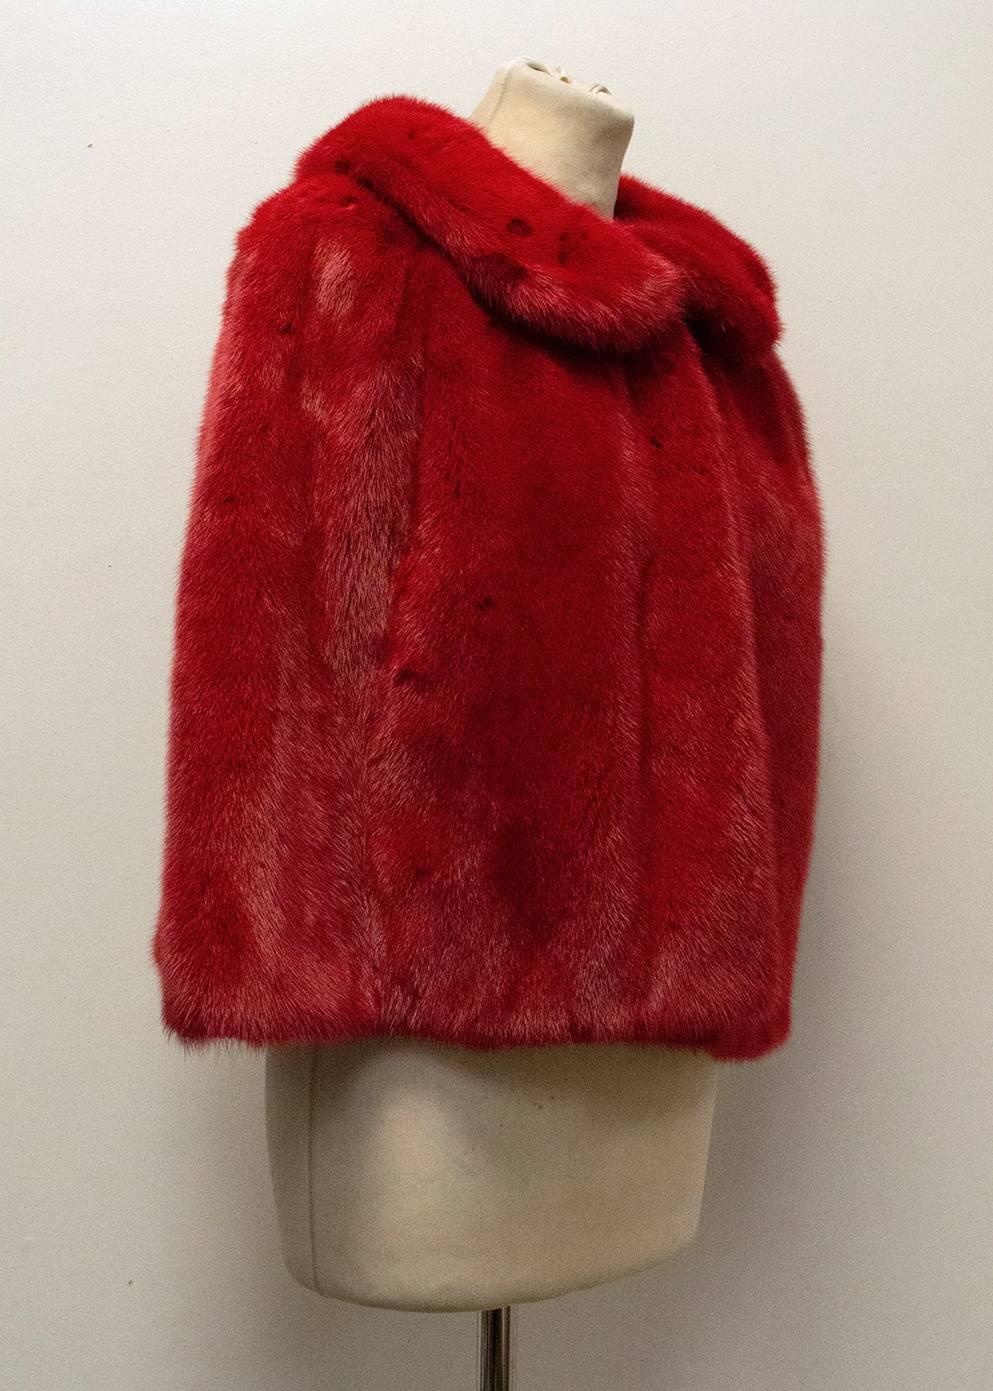 Dolce & Gabbana red mink fur poncho with lace detail. This item features a fold over collar, red lace interior and one dome front button. 

Medium weight. 
Excellent condition.
Condition: 9.5/10

100% Mink.